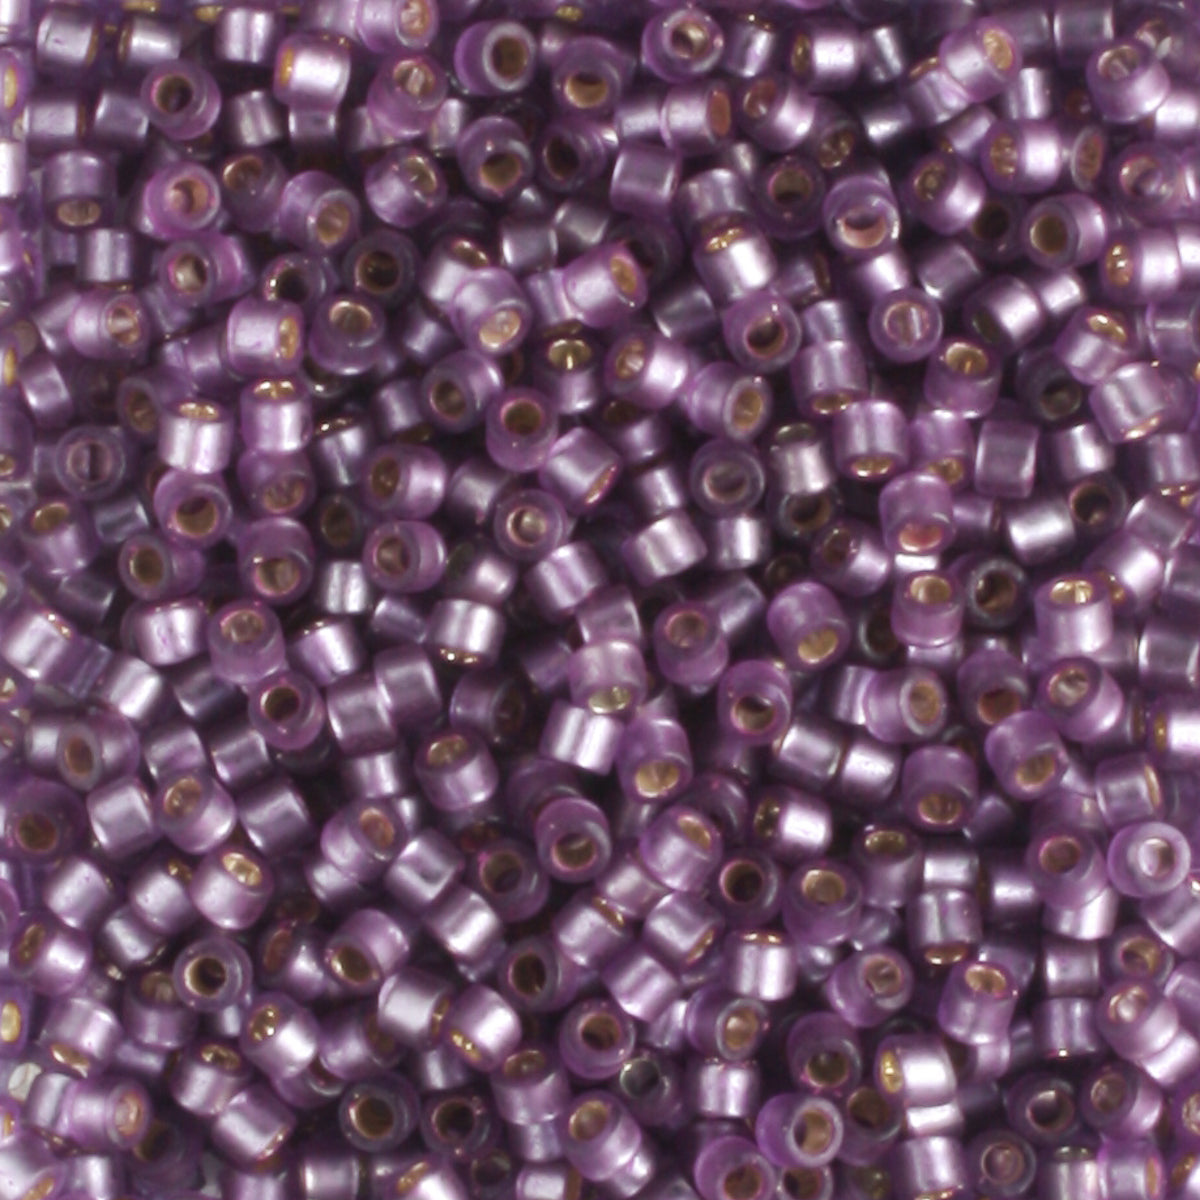 DB0695 Silver Lined Frosted Violet - 5 grams